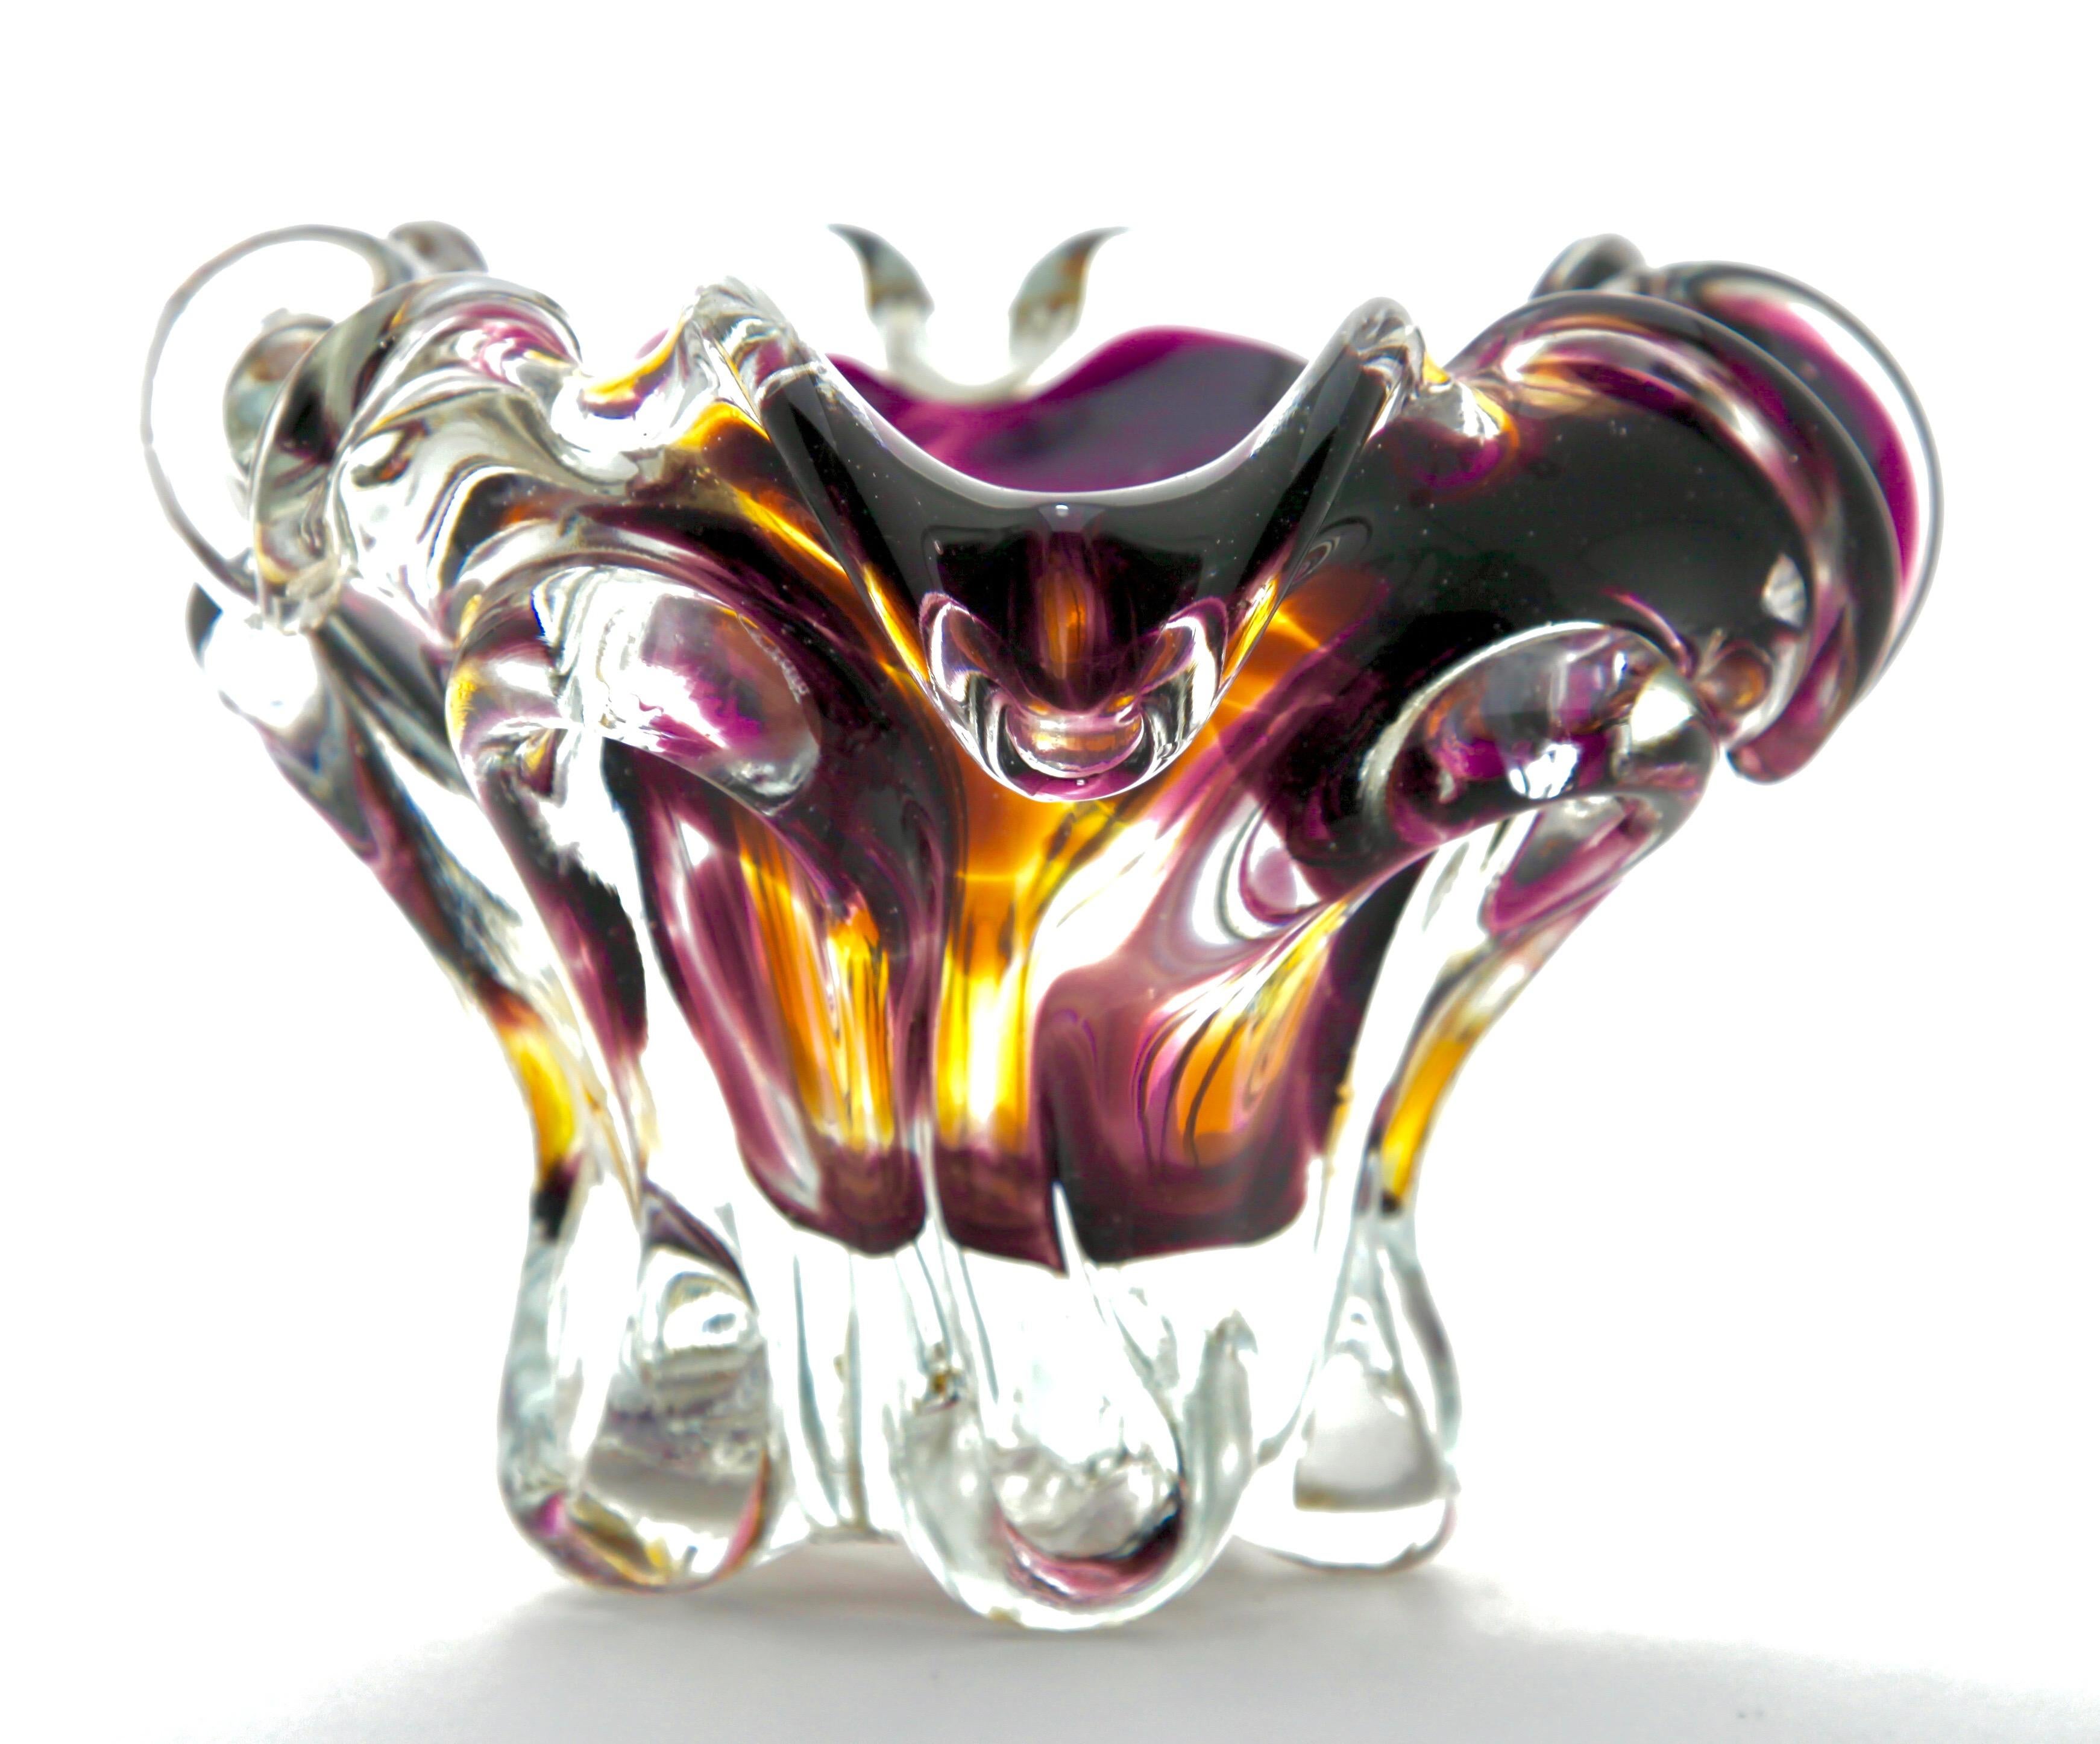 Rich purples and ambers bring the color to this modern decorative bowl which has been handcrafted
Whit factories stamp Roemischer Glashütte

The piece is in excellent condition and a real beauty!
Weight crystal 4.6